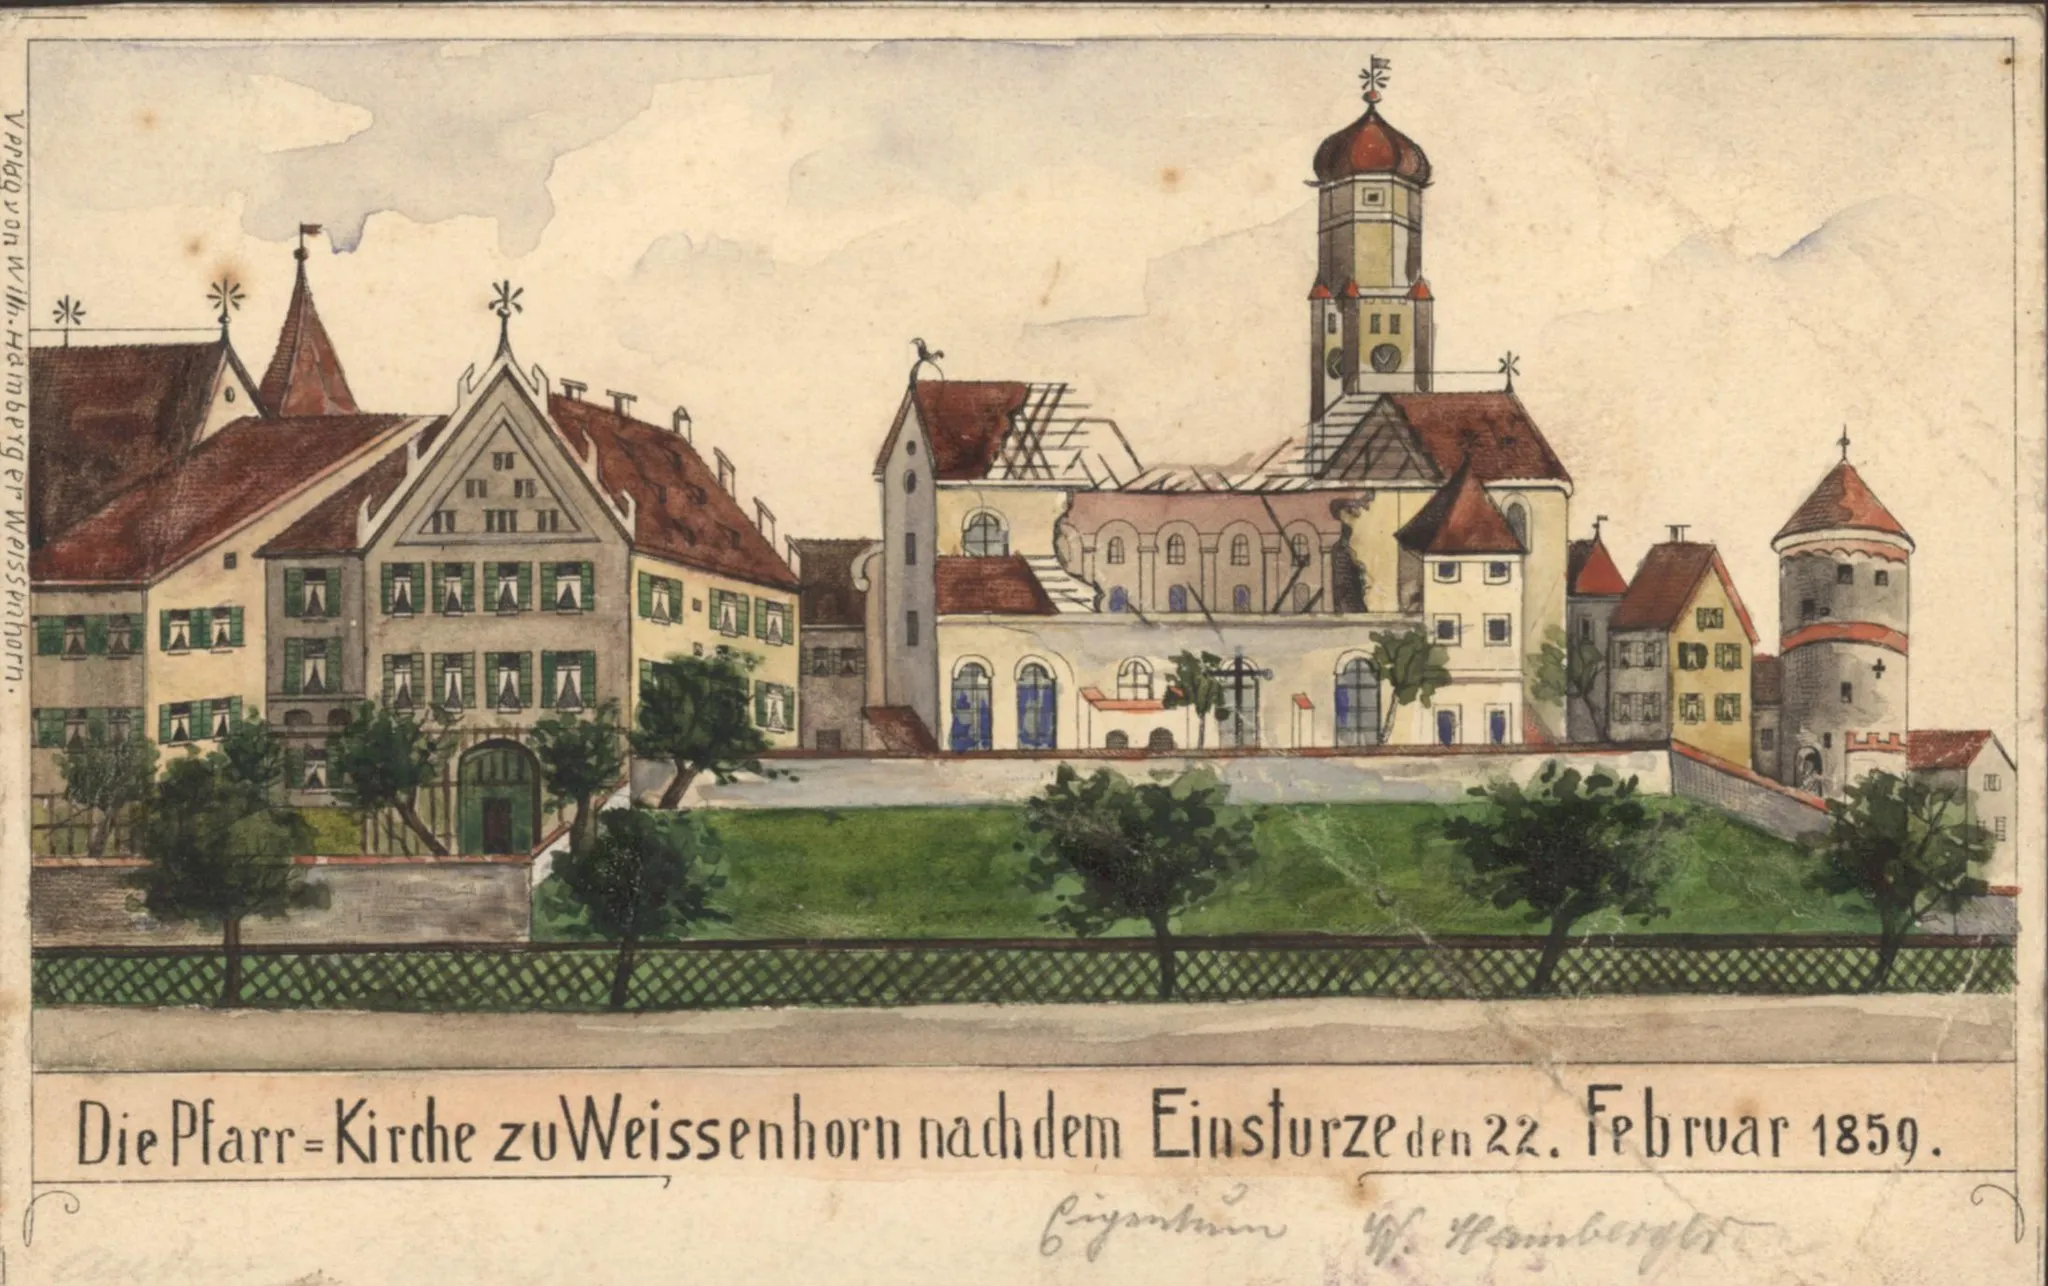 Photo showing: The church of Weißenhorn after the collapse on 22 February 1859